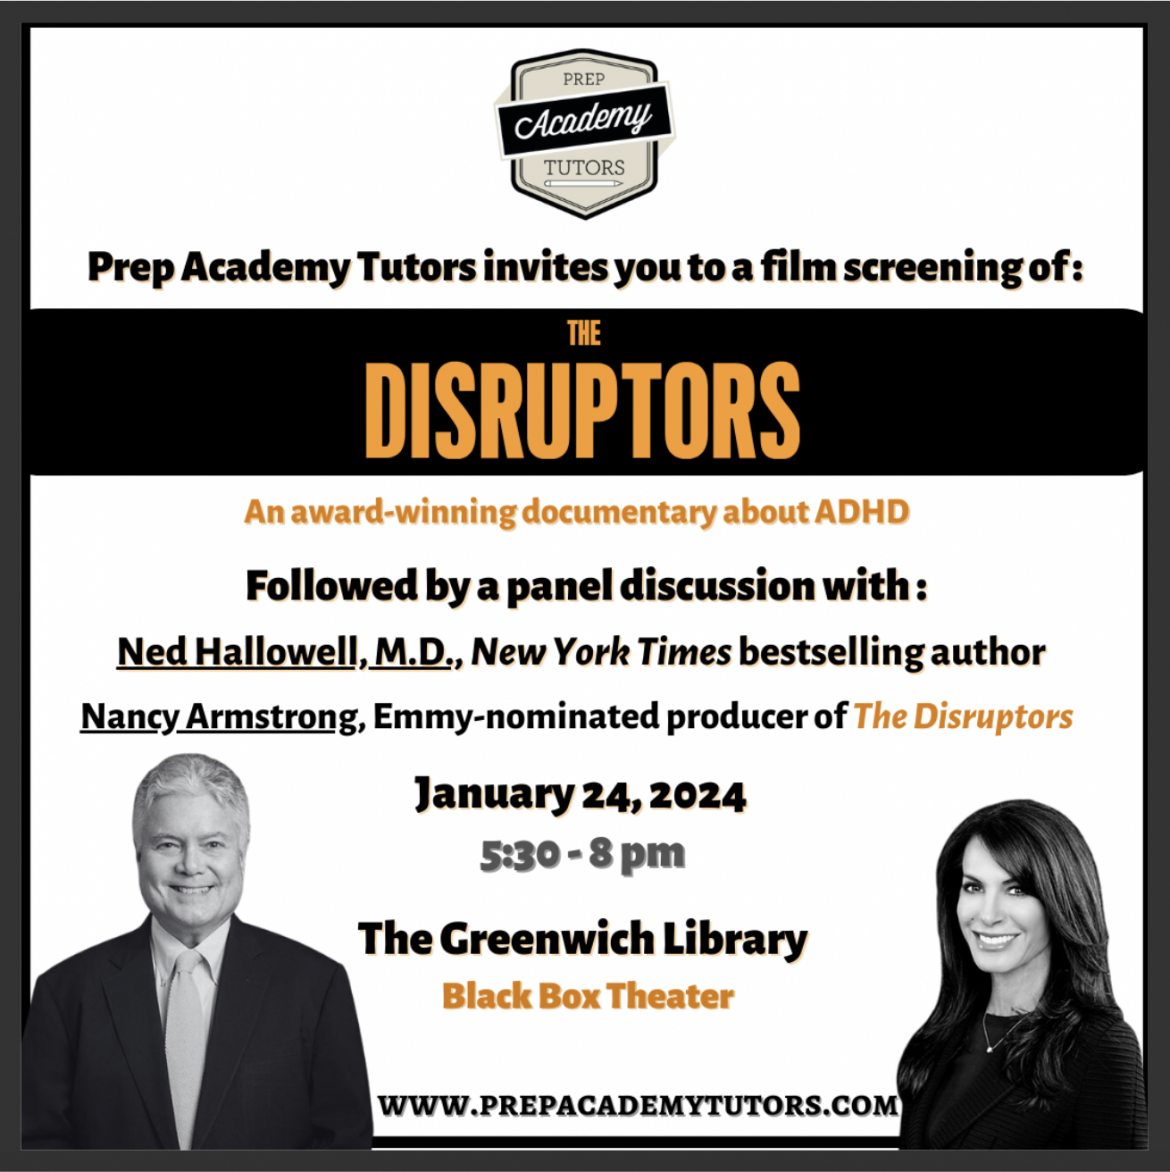 Disruptors movie and panel discussion